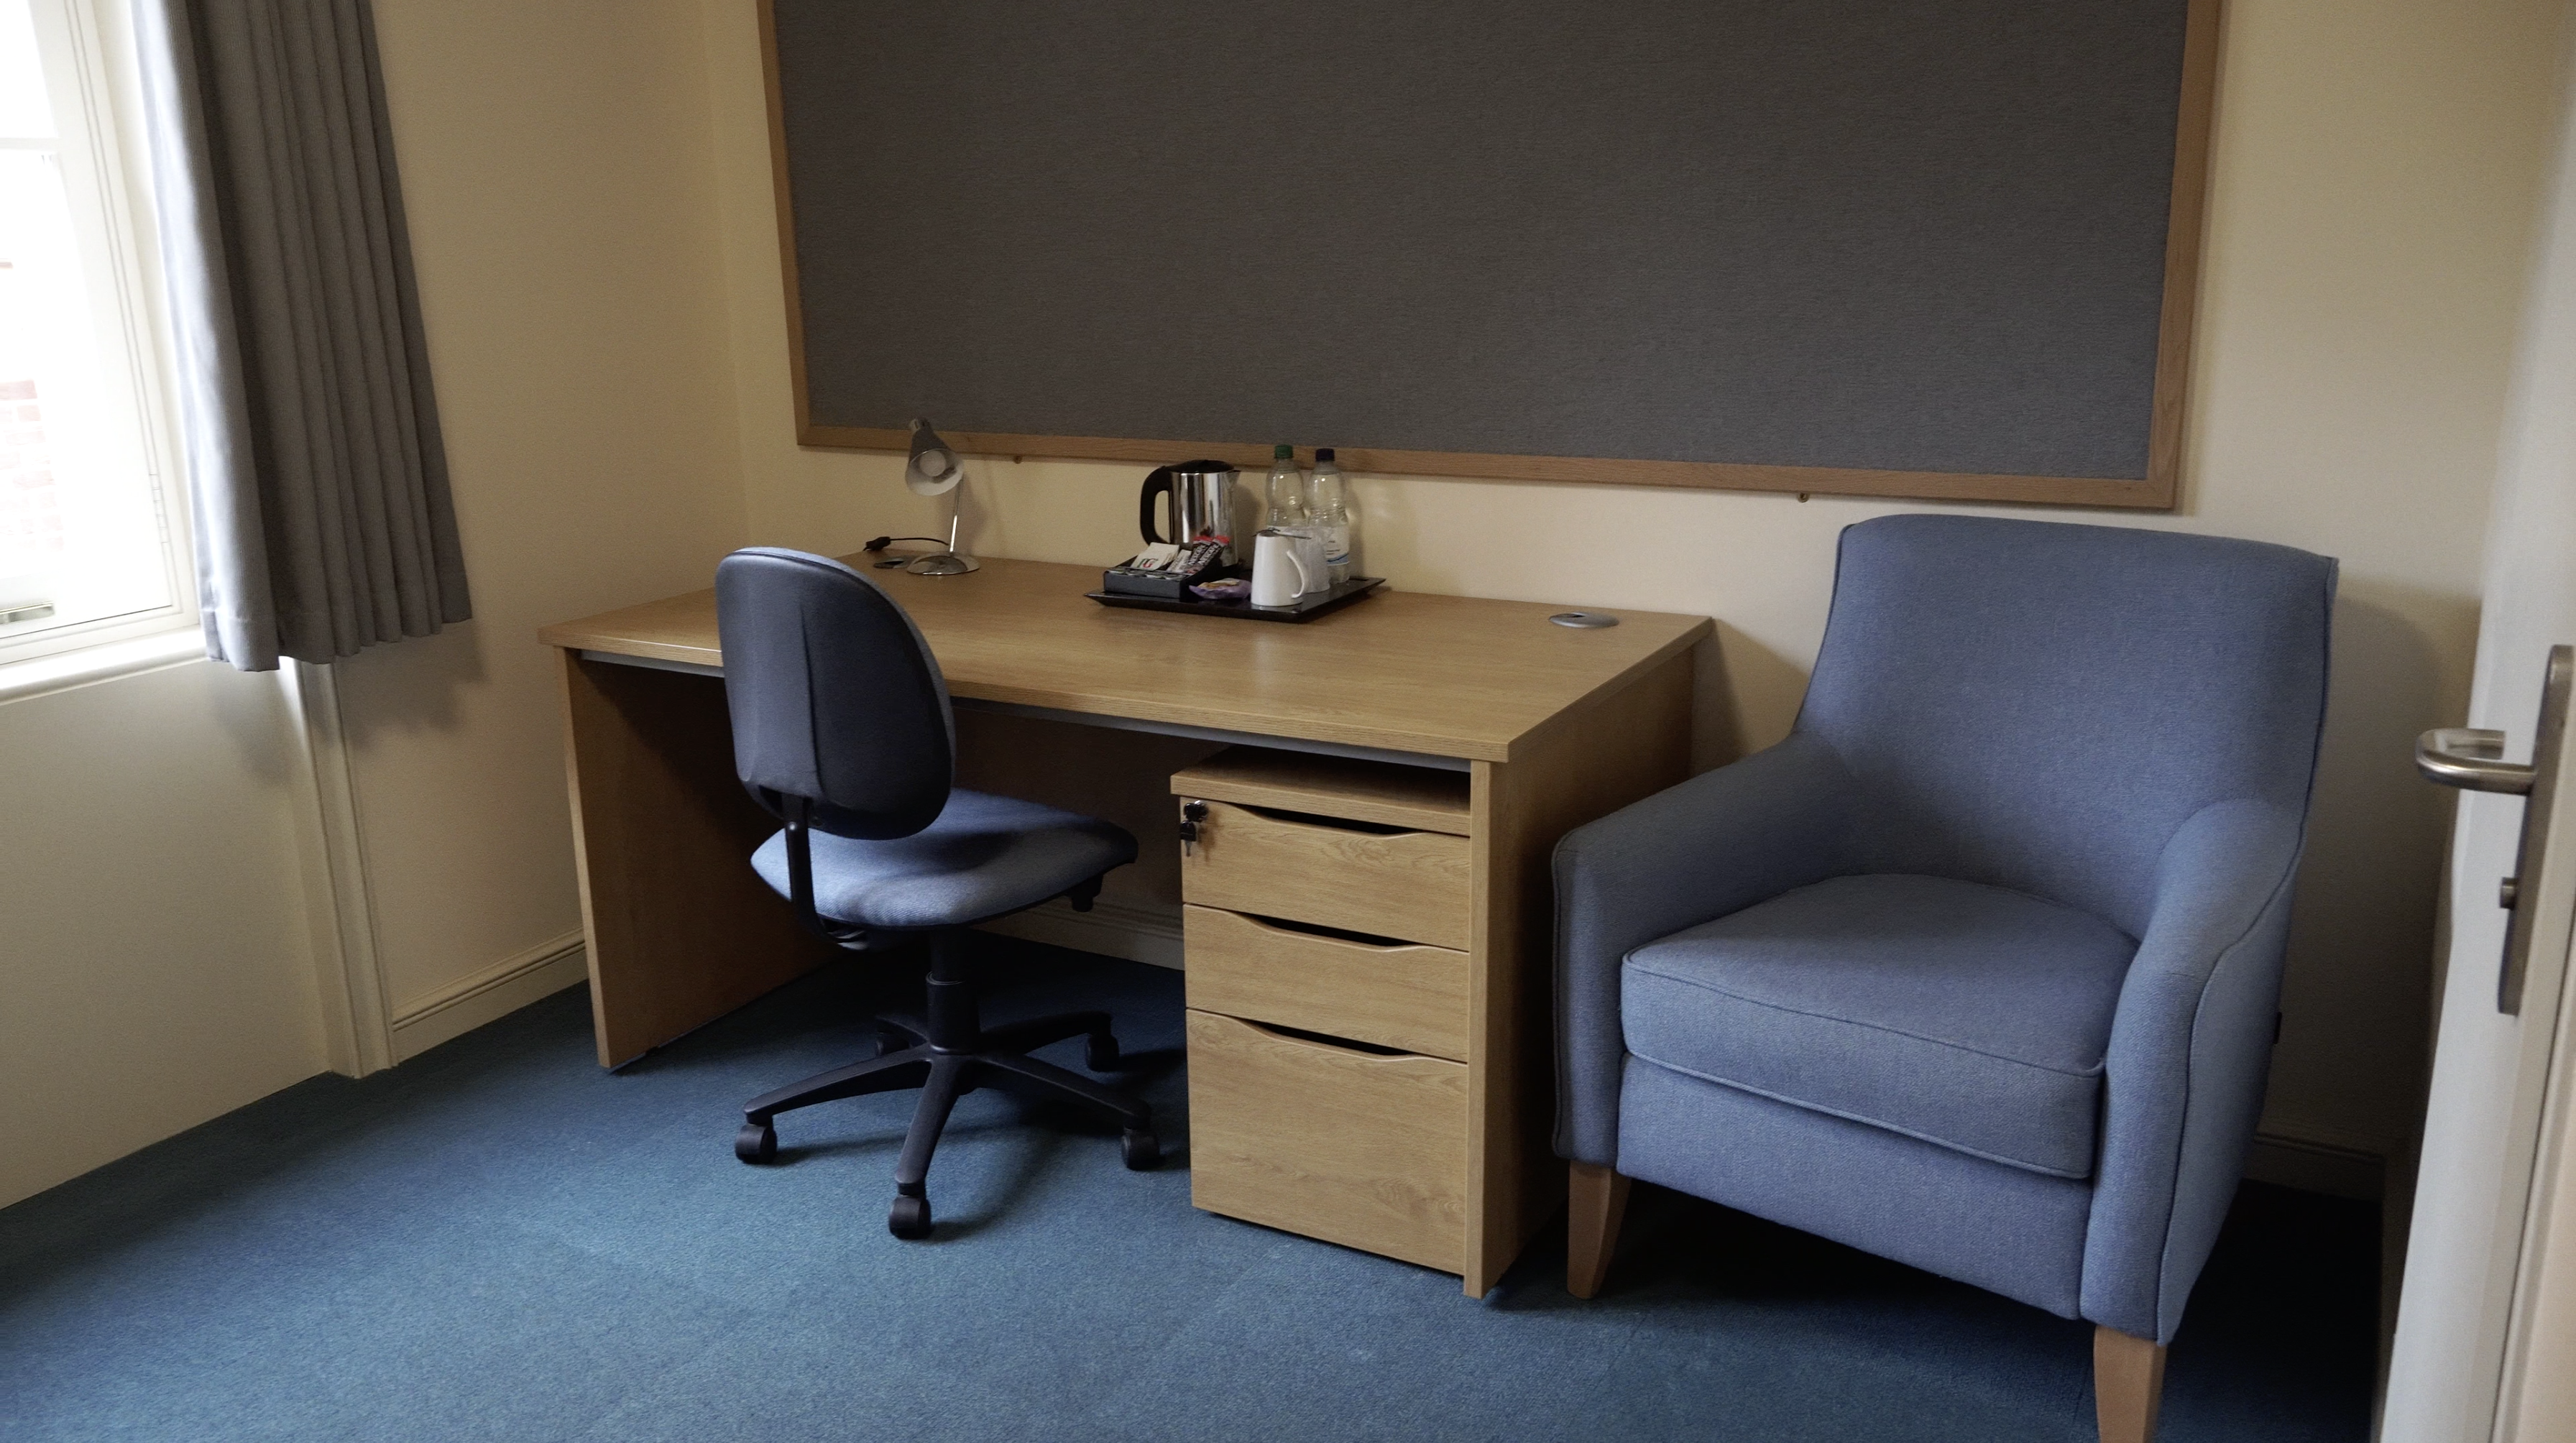 Picture of a Graduate room at LMH showing a desk and a chair